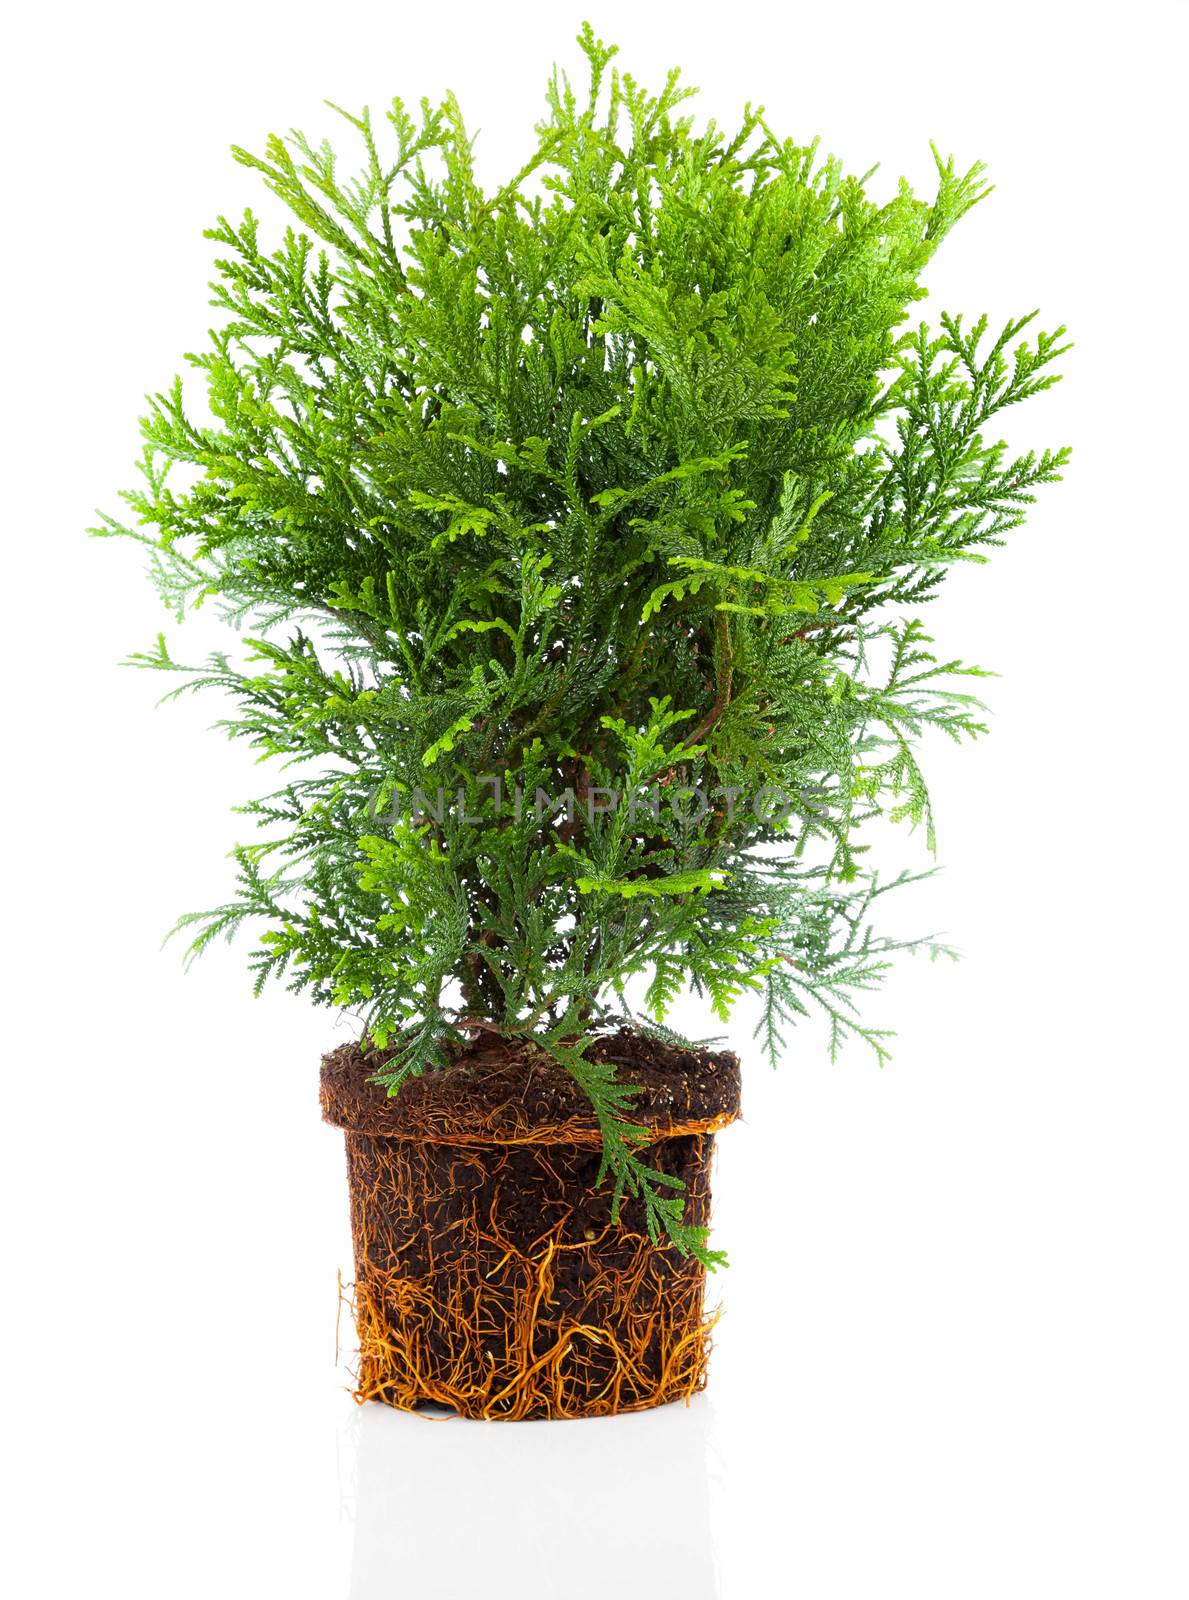 Thujopsis is a conifer in the cypress family Cupressaceae, with  by motorolka